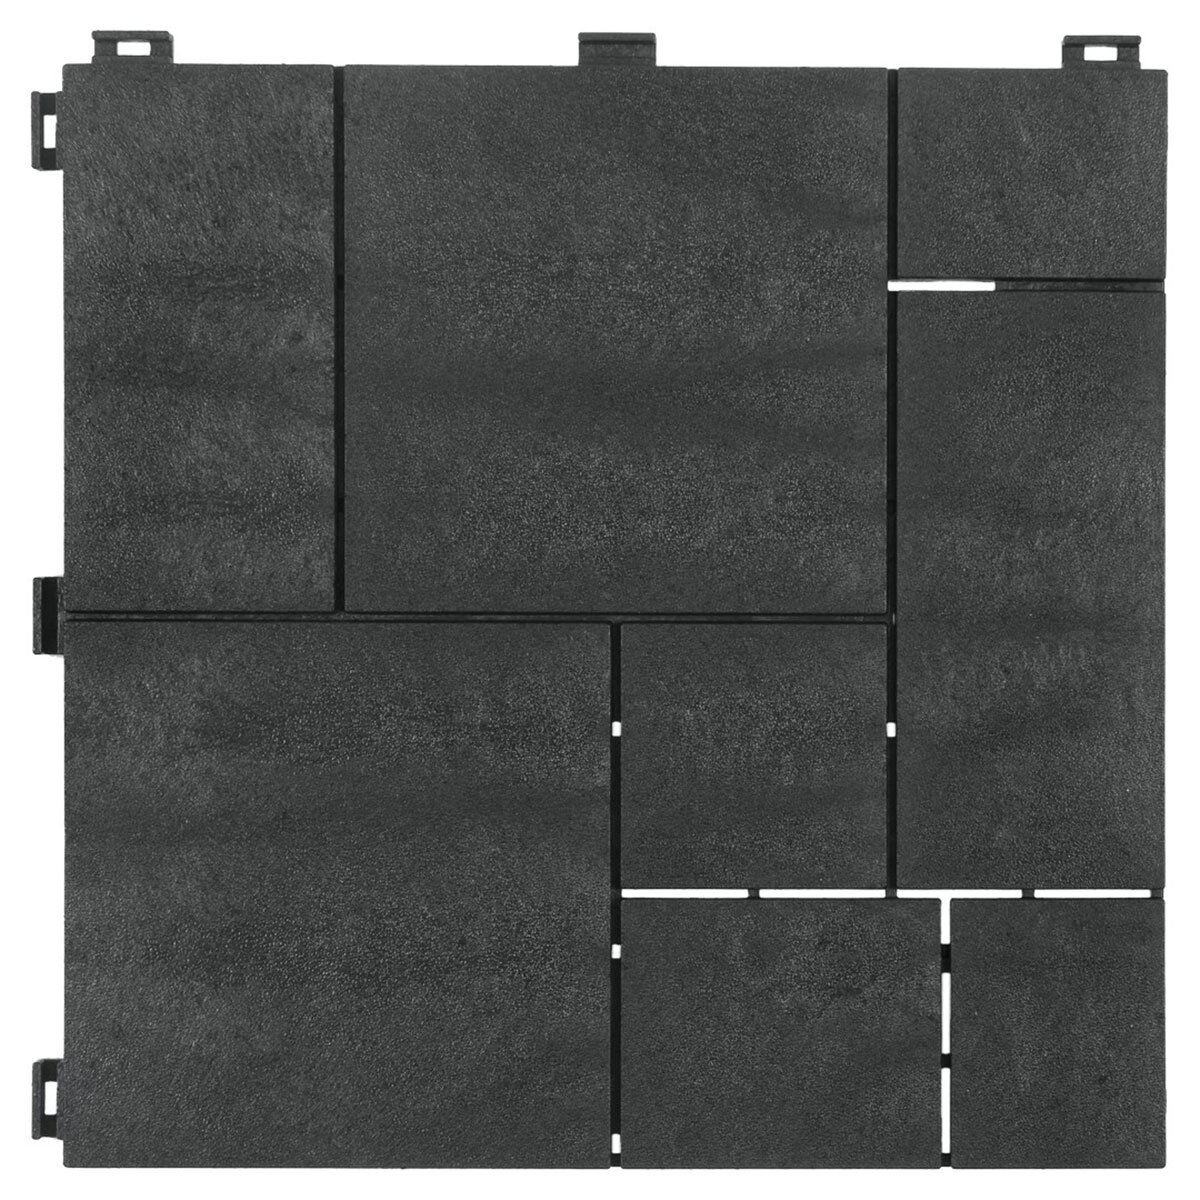 Easy Tile Cosmo Deck Tiles (300 x 300 x 15 mm) - 10 Pack